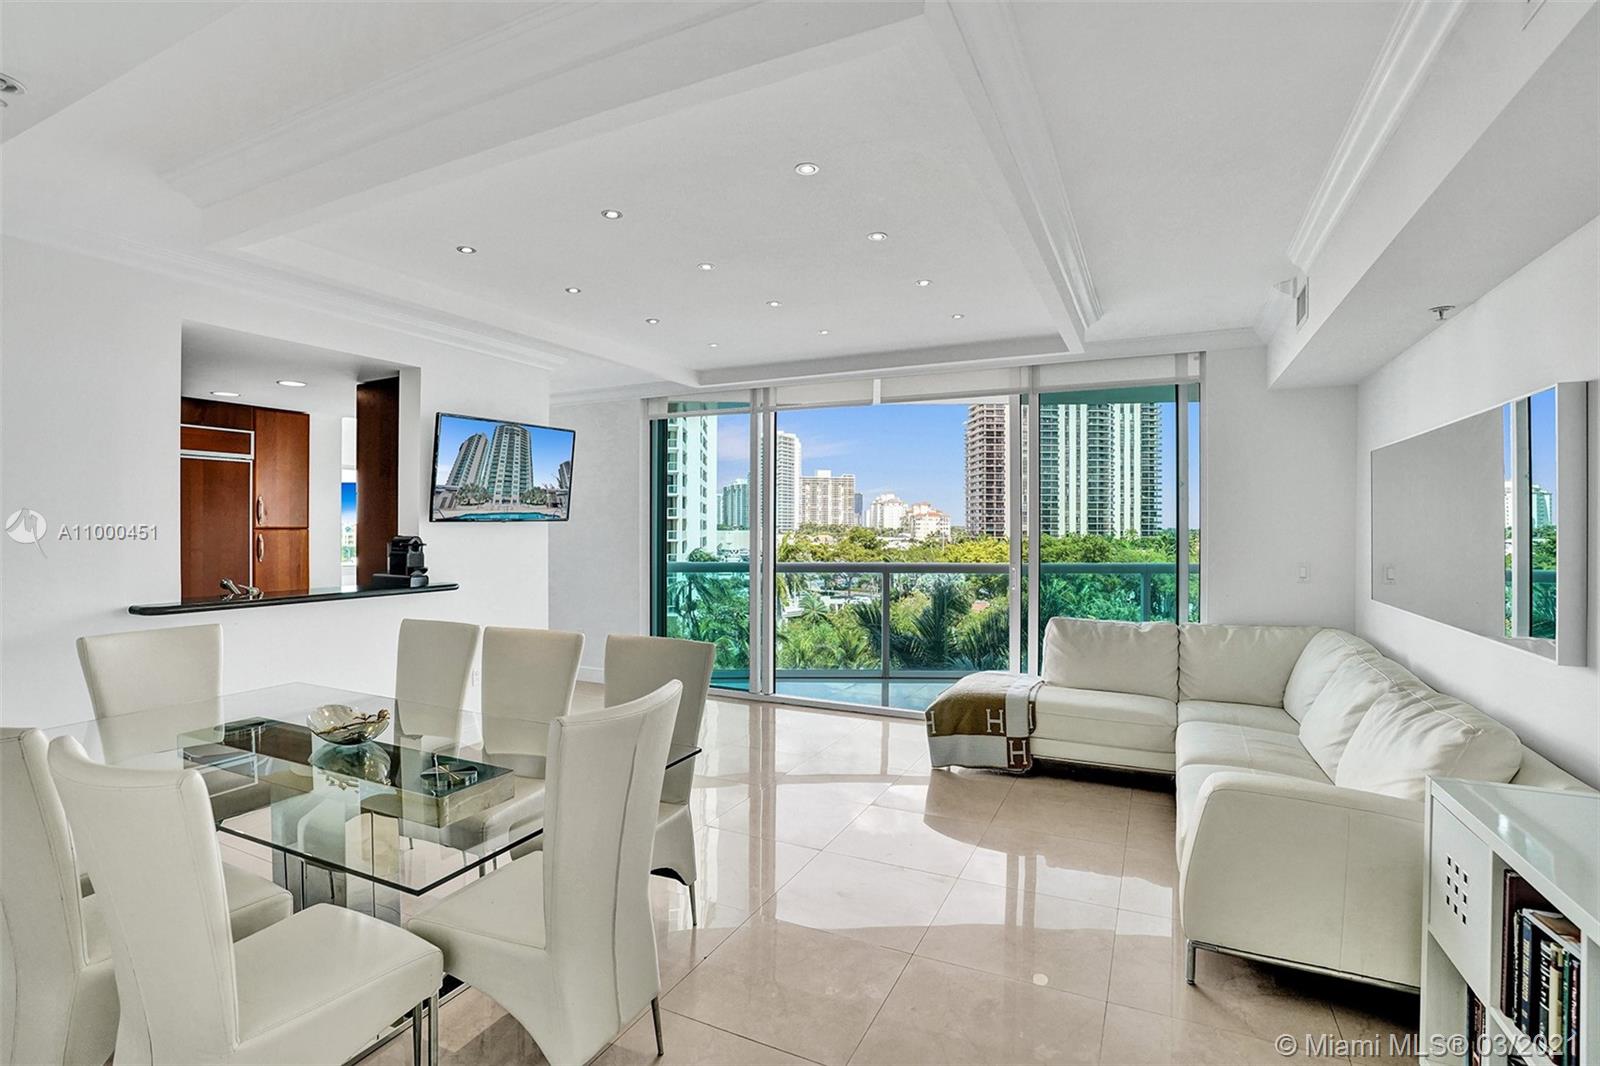 The Parc at Turnberry Isle image #1